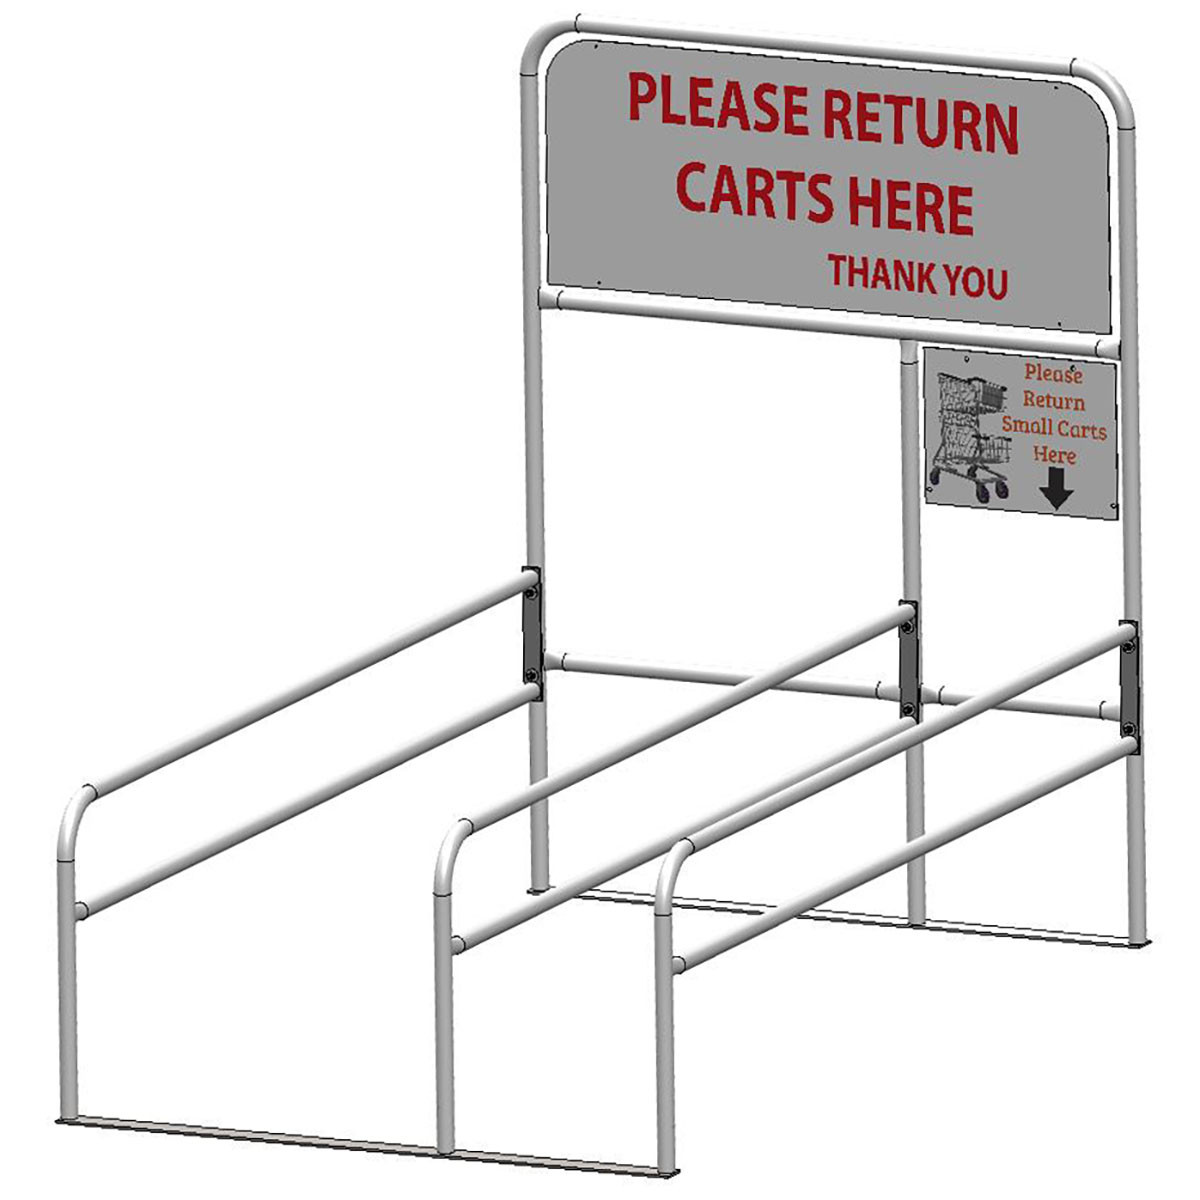 Cart Corral cart rack parking lot corral customer cart collection galvanized mechanical steel tubing and hot-dipped galvanized base plates shopping carts cart return Single cart corral double cart corral single corral double corral carriage storage single entry double entry through corral cart corral signage